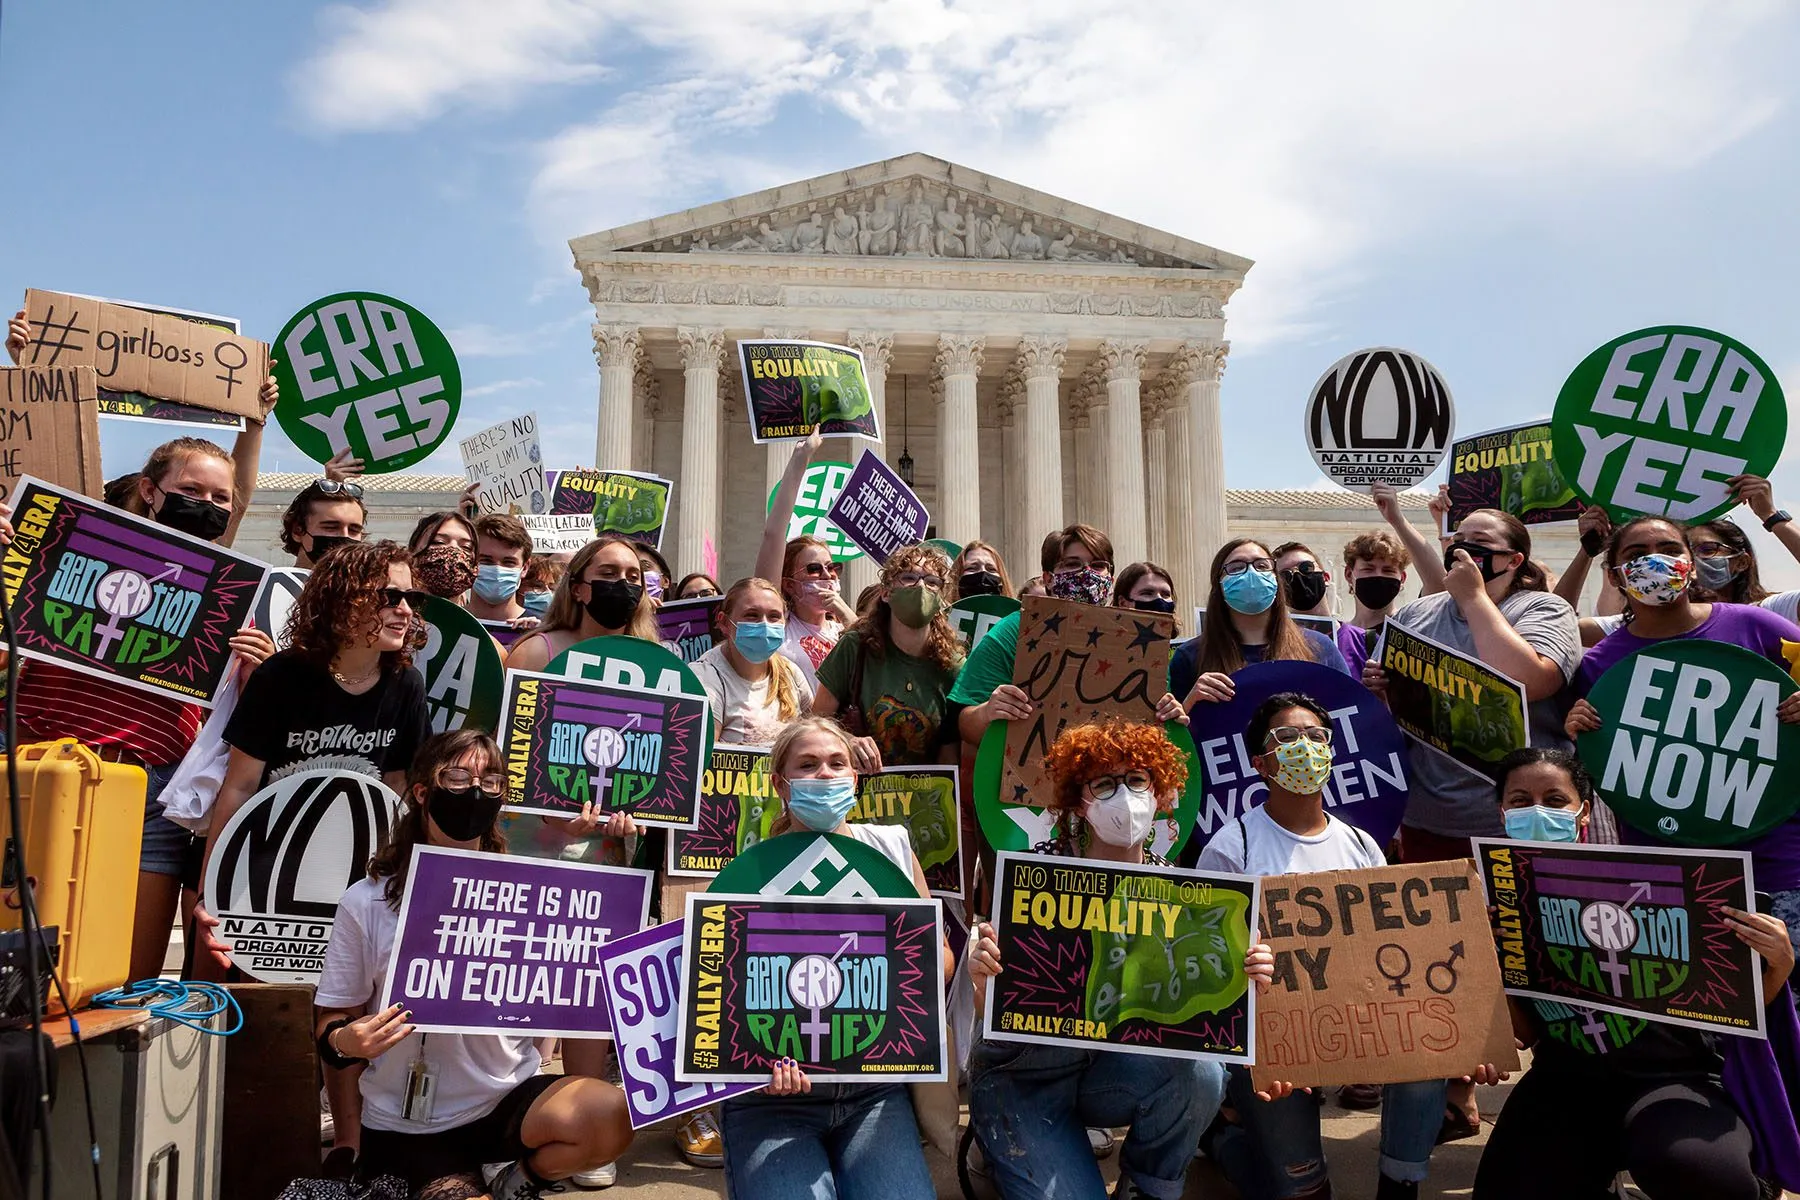 Members of Generation Ratify hold signs that read "ERA YES" and "No time limit on equality" in front of the Supreme Court.